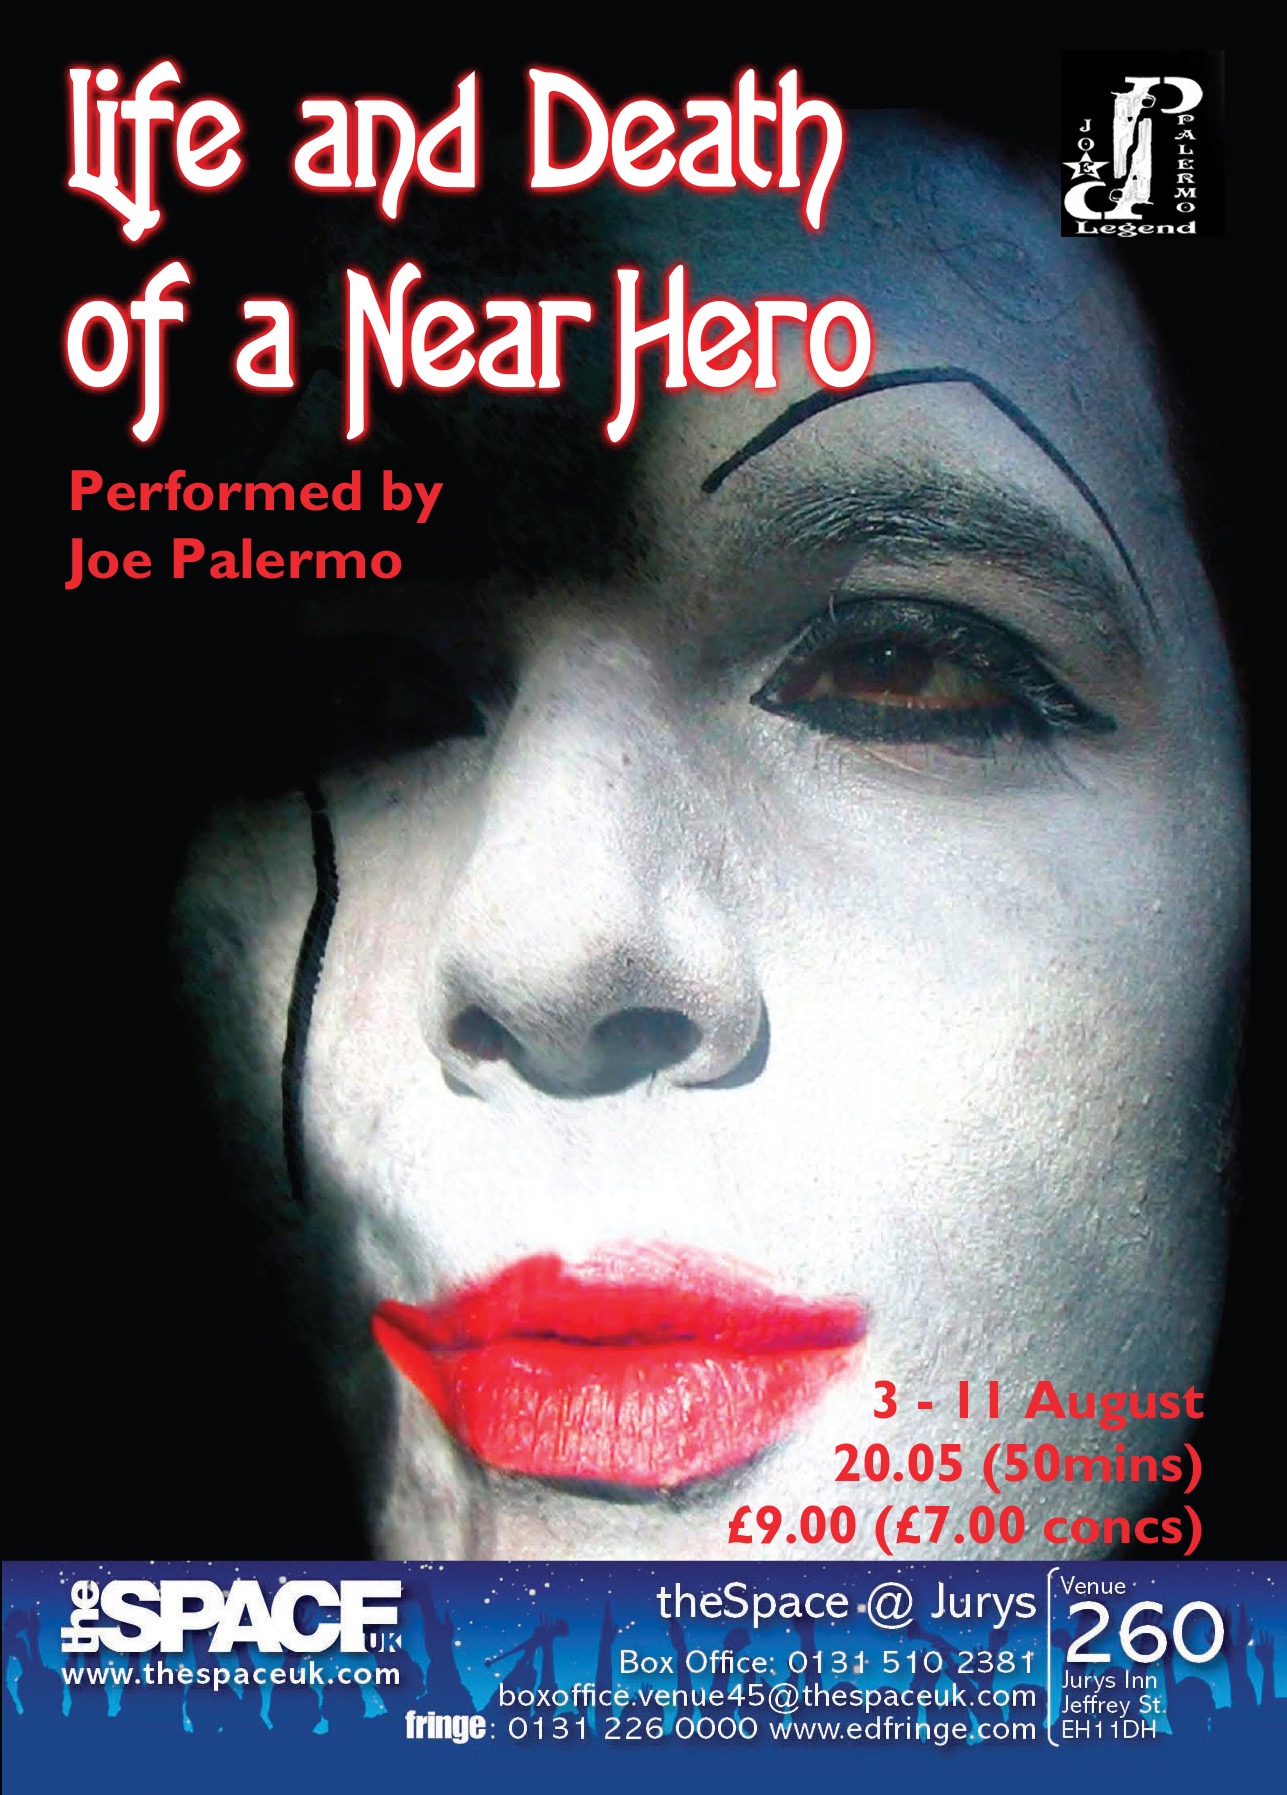 The poster for Life And Death Of A Near-Hero